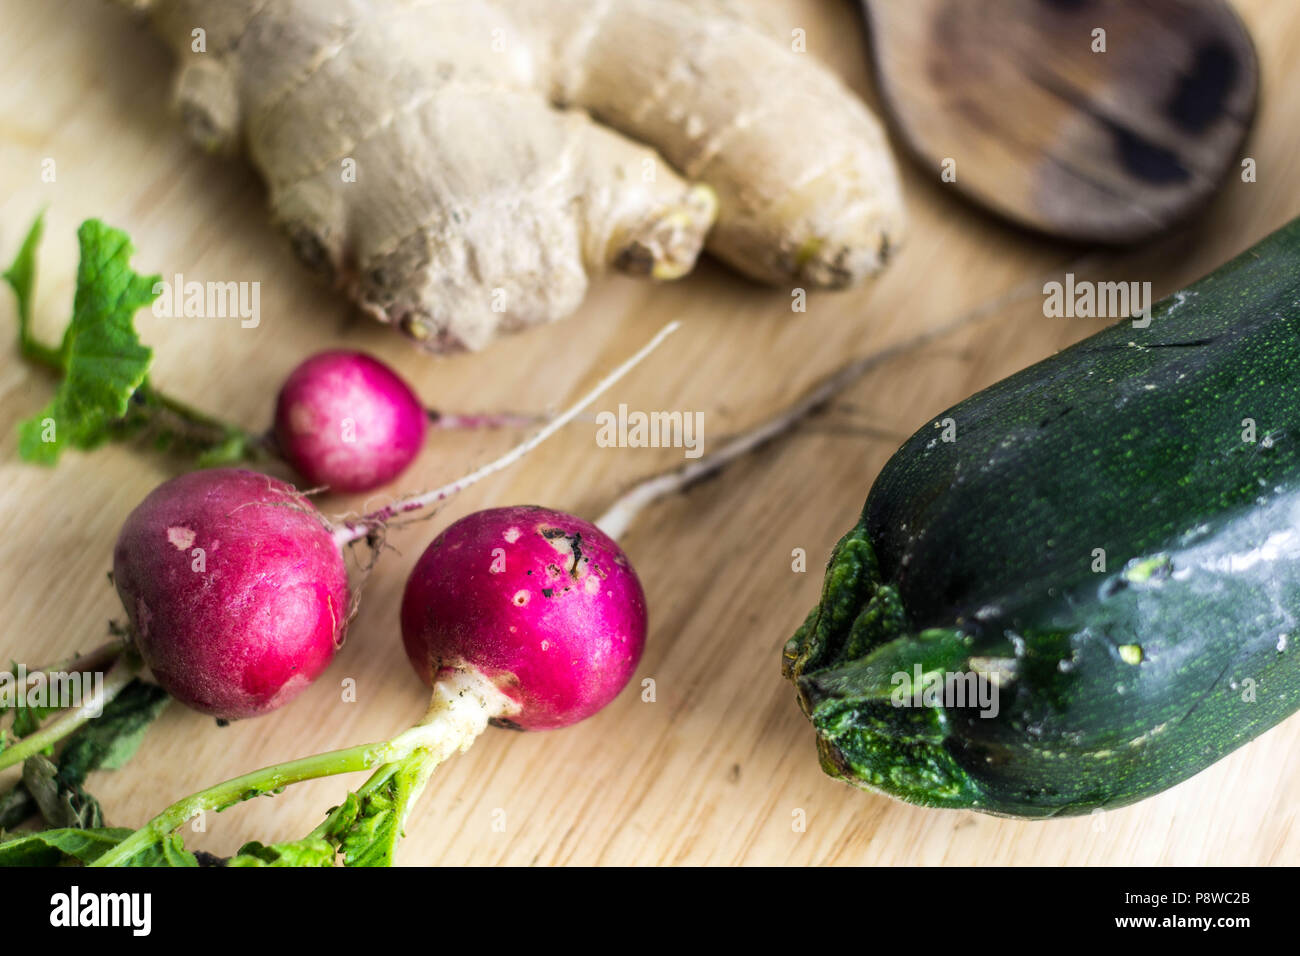 Ginger Zucchini Radish Healthy Ingredients Body Weight Loosing Weight Dinner Cooking Nutrition Vegetables Vegan Meal Natural Taste Fresh Soft Stock Photo